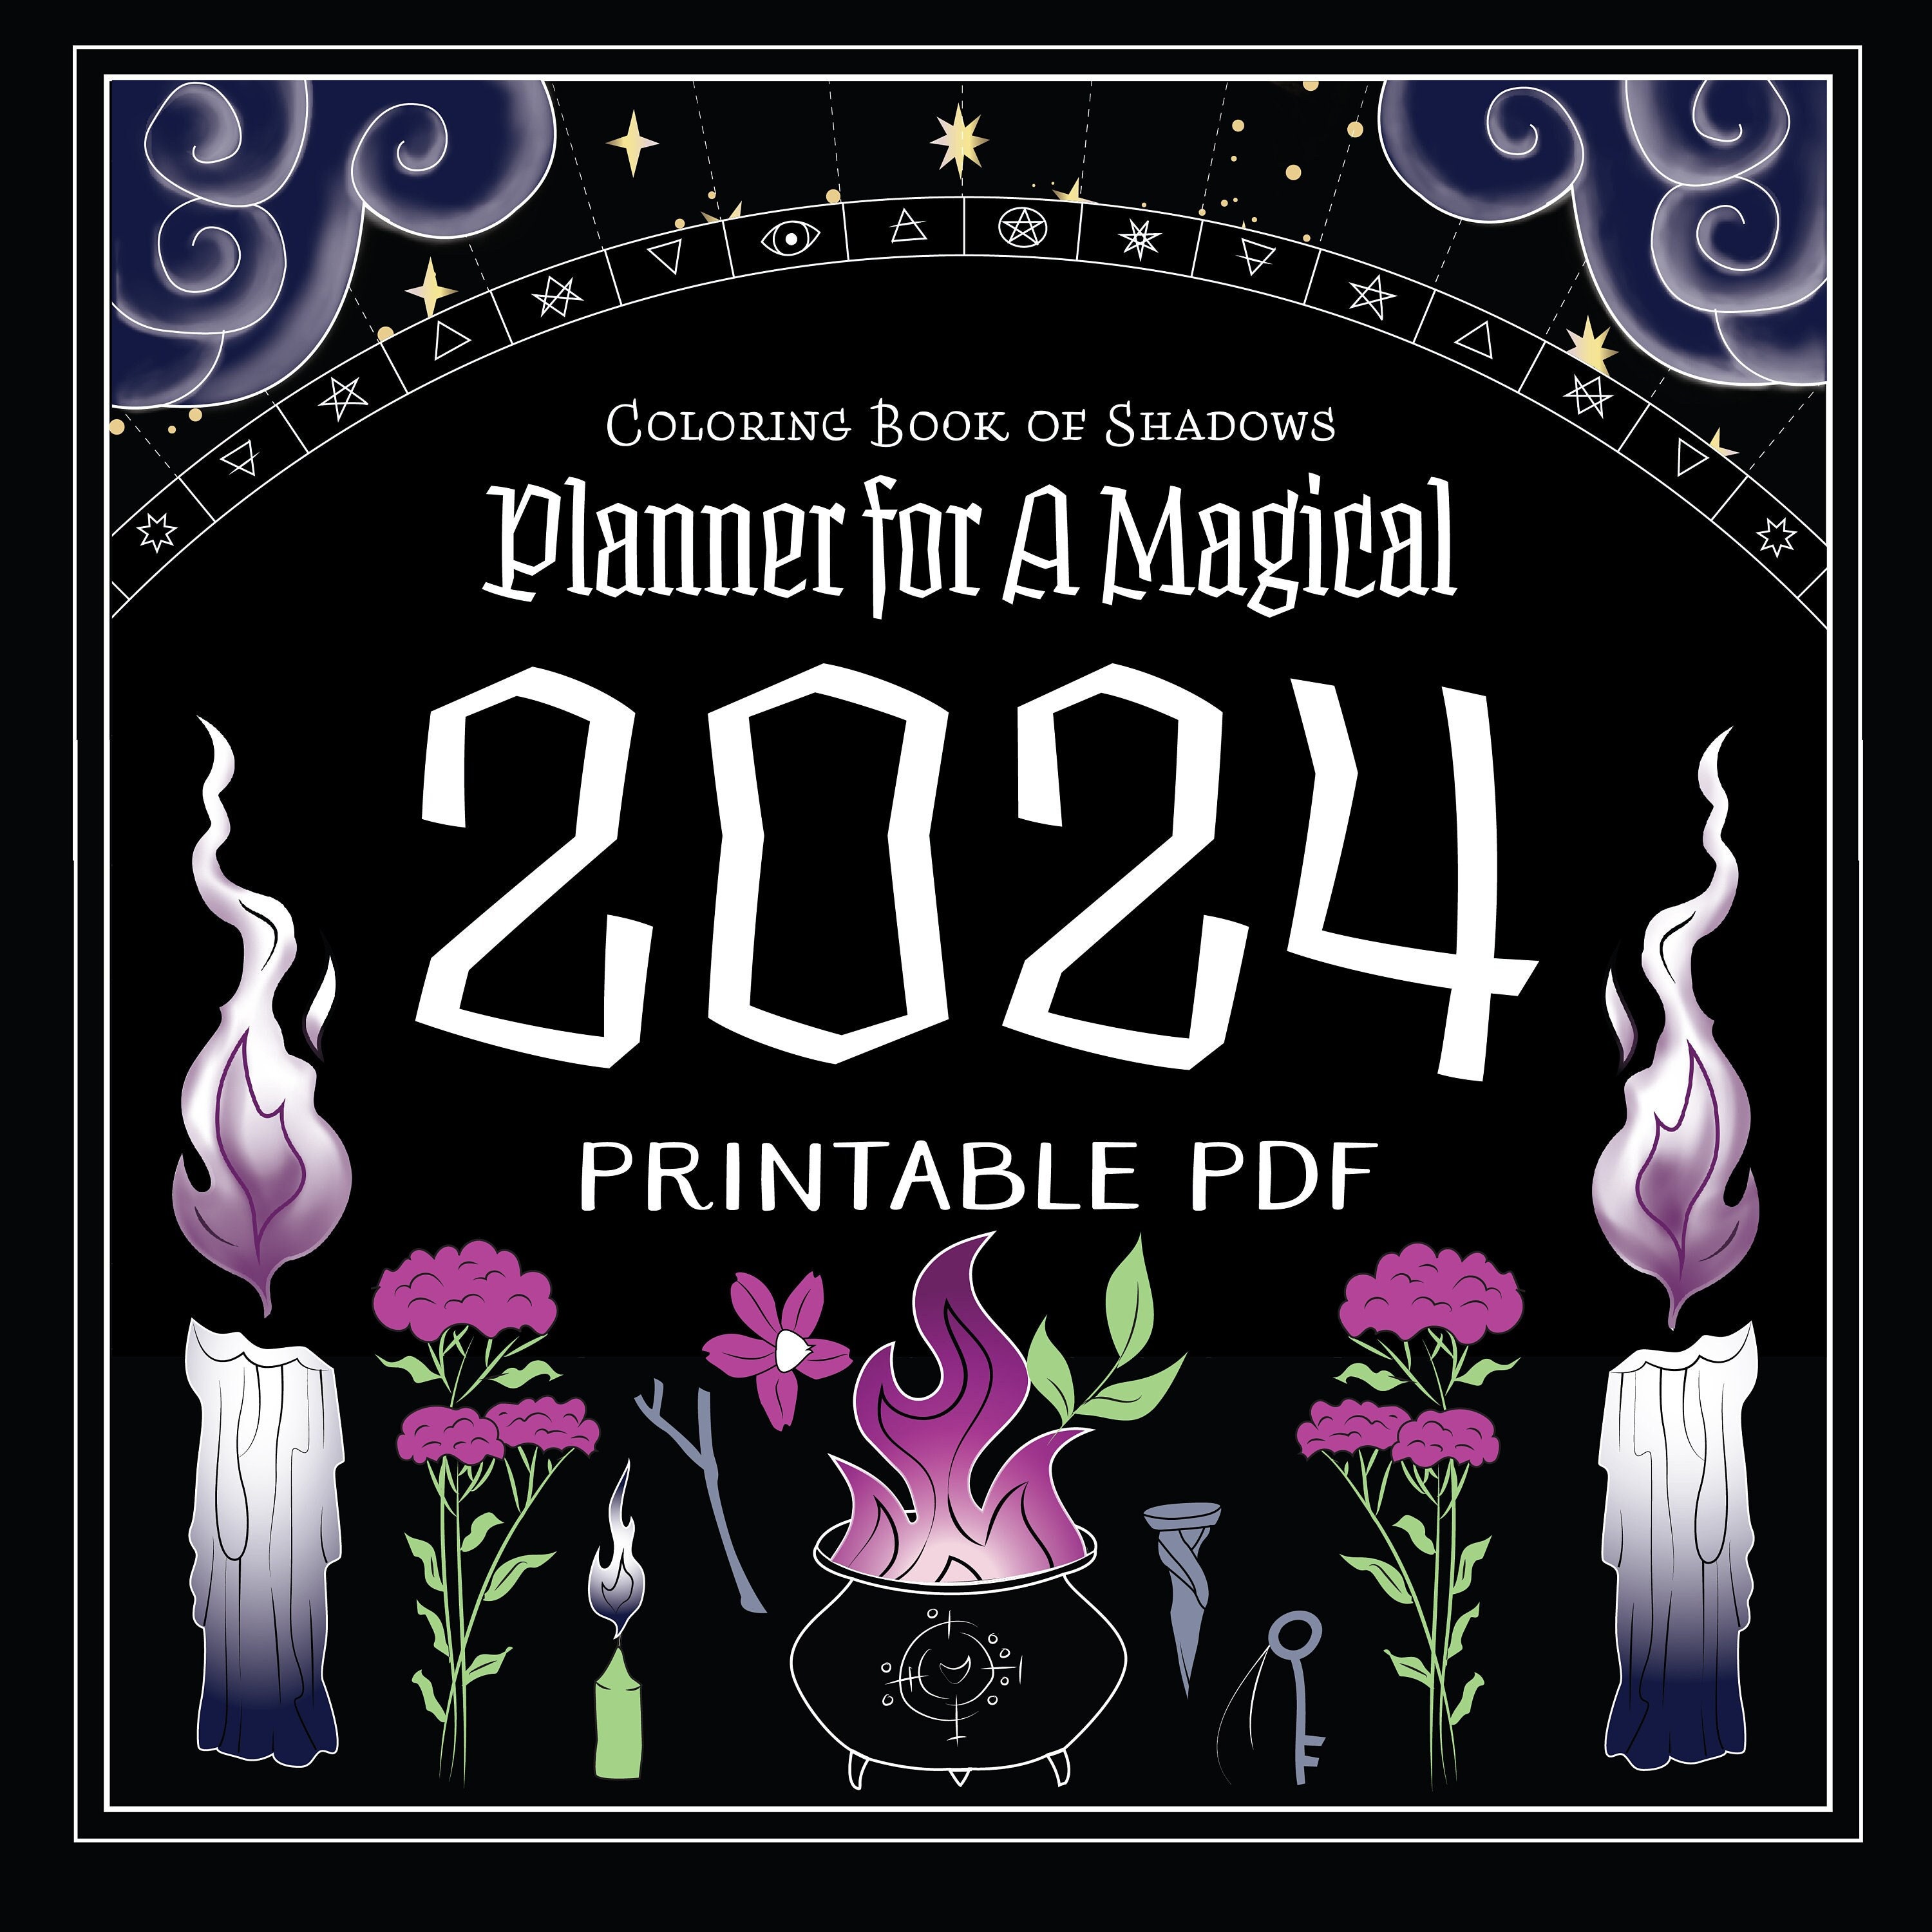 Coloring Book of Shadows: Planner for a Magical 2021 by Cesari